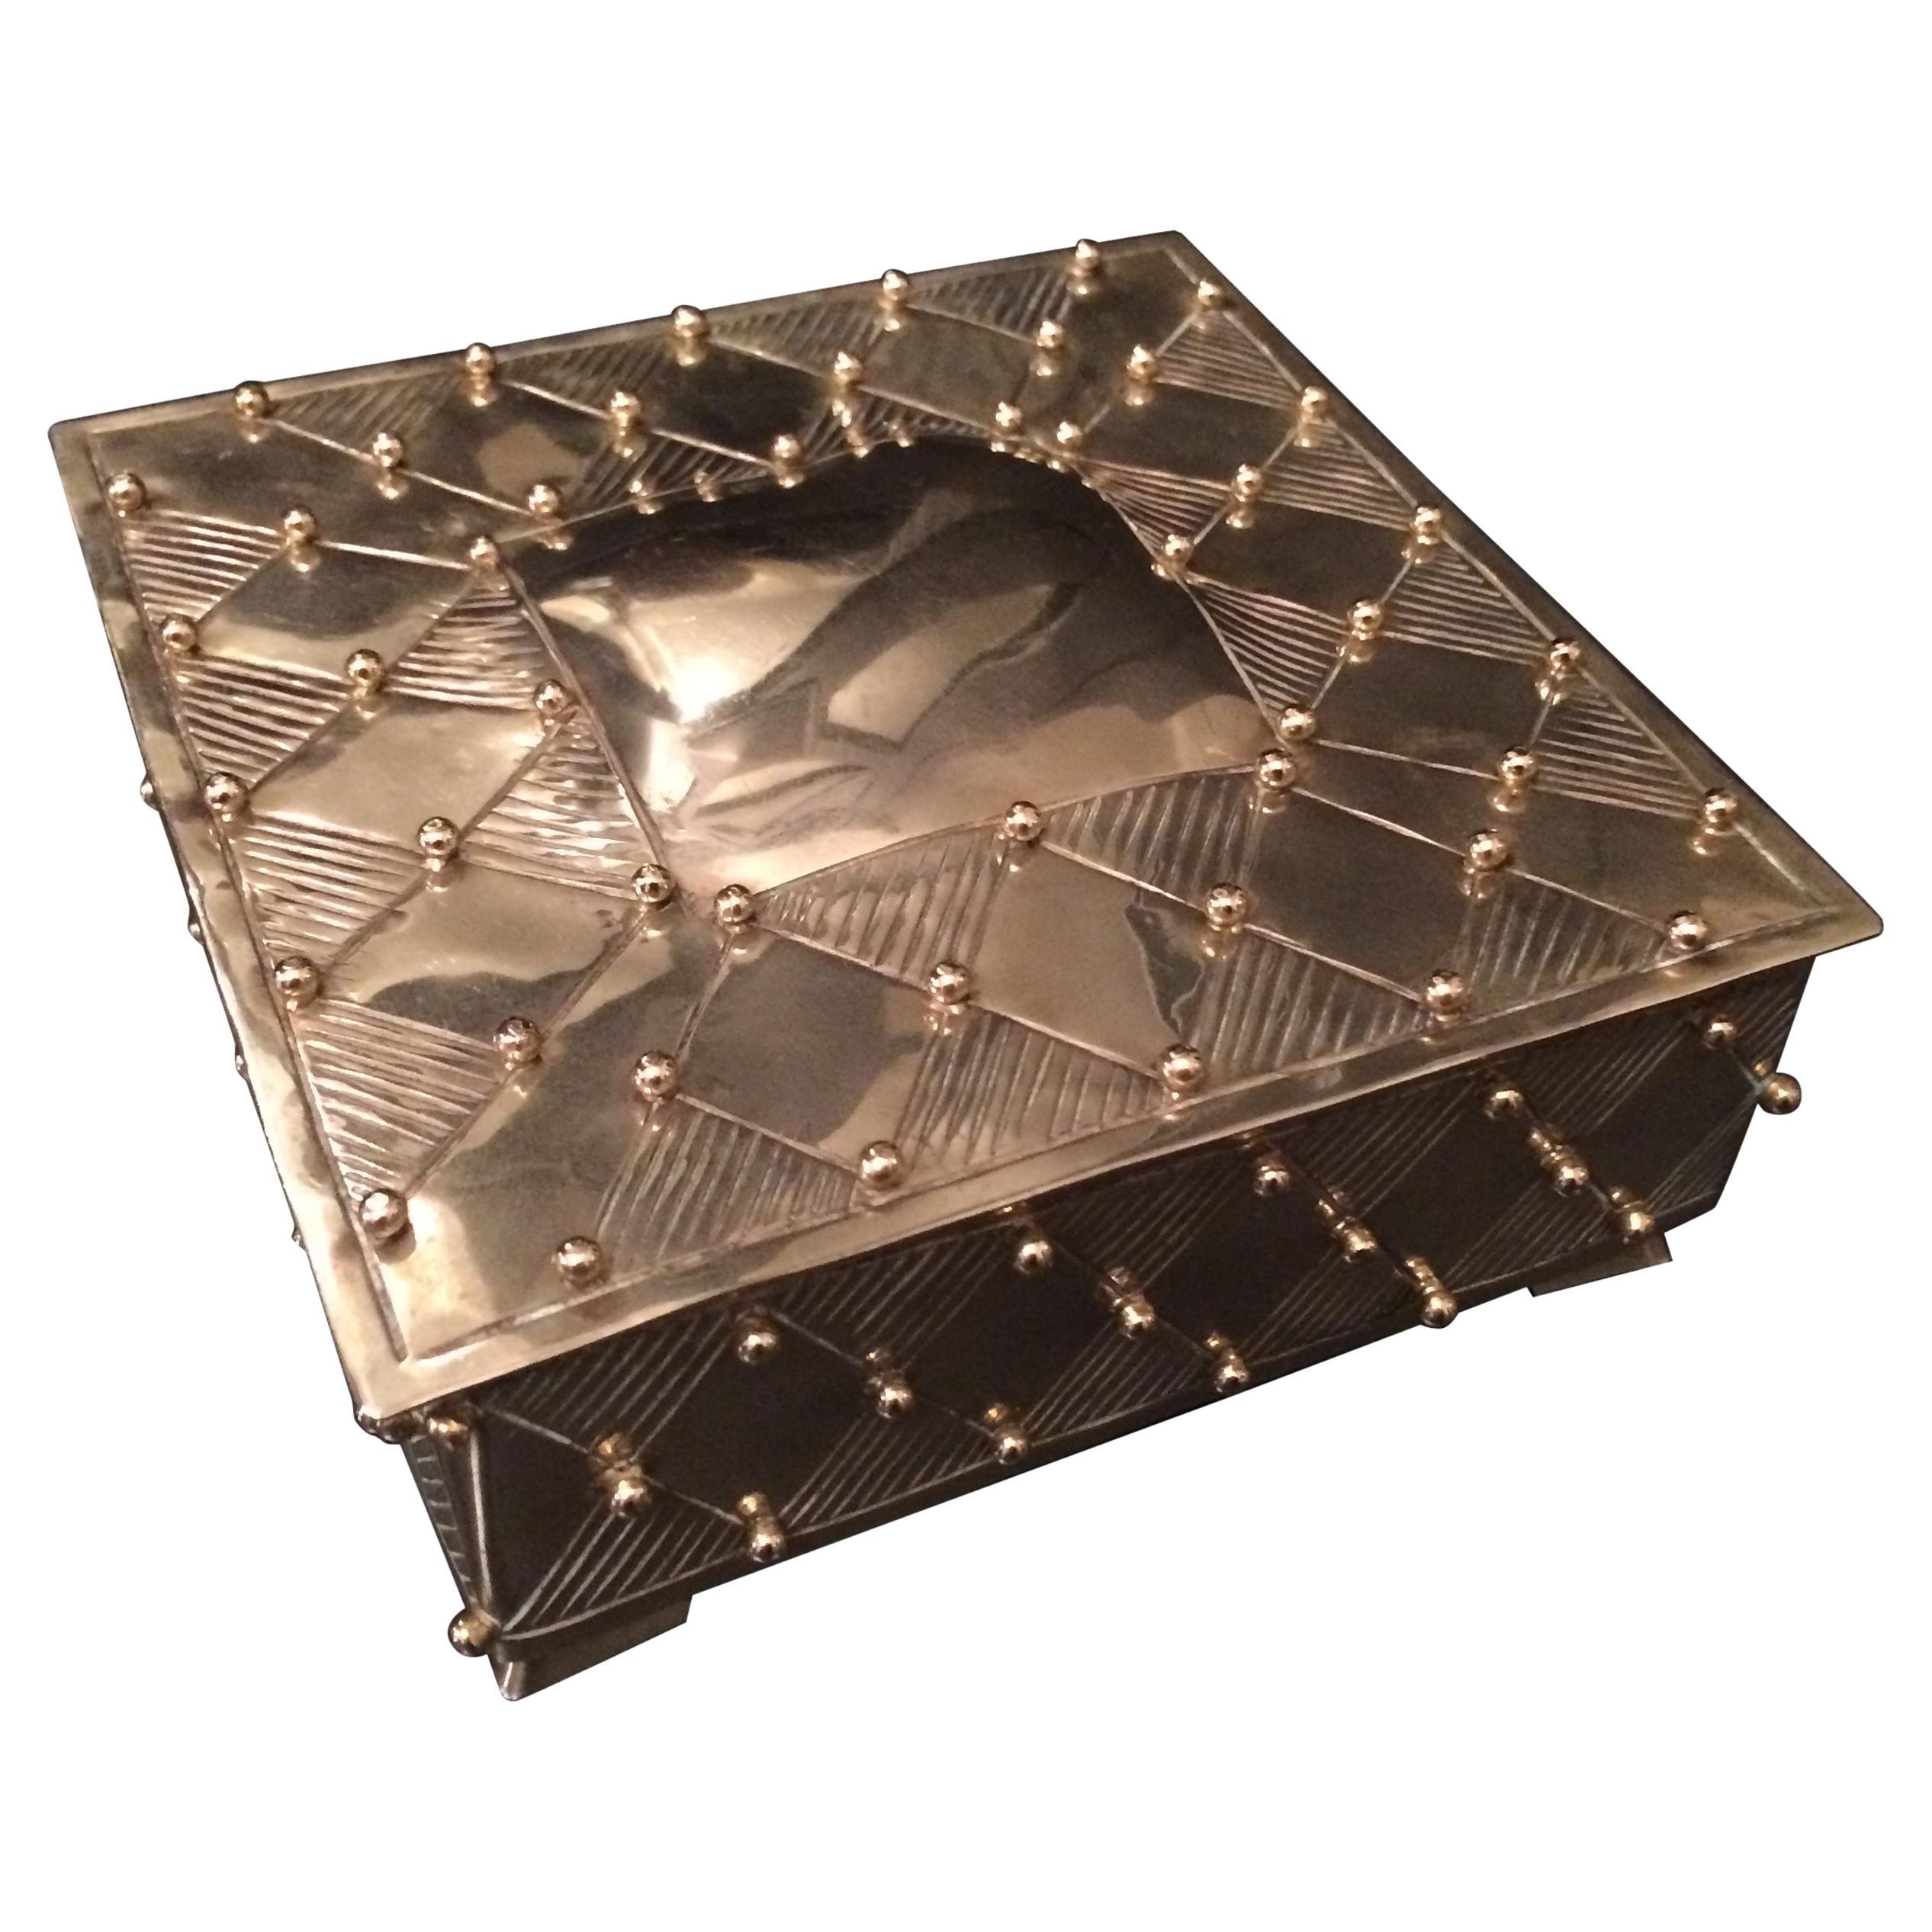 Beautiful 'Harlequin' check pattern silver plate box with brass bead details is a stunning addition to the desk, vanity or any shelf in your home. Great for jewelry, mementos, paper clips, 420, etc. The inside is lined in black velvet.